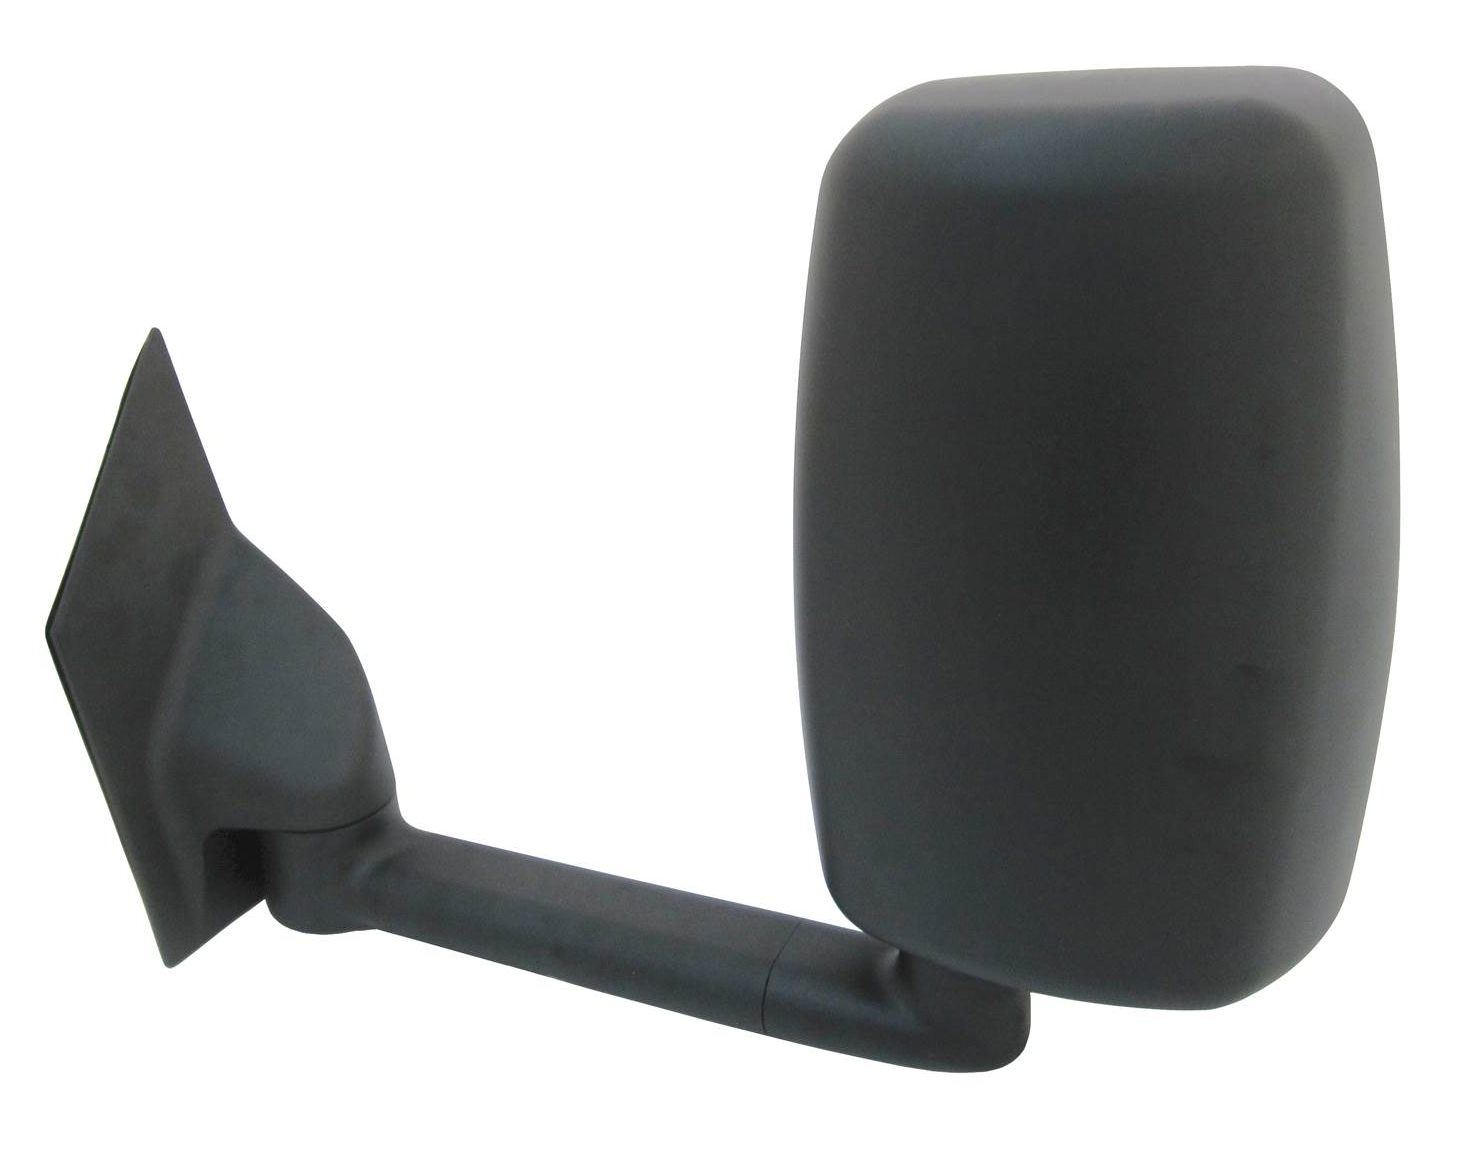 Aftermarket MIRRORS for CHEVROLET - EXPRESS 1500, EXPRESS 1500,03-11,LT Mirror outside rear view